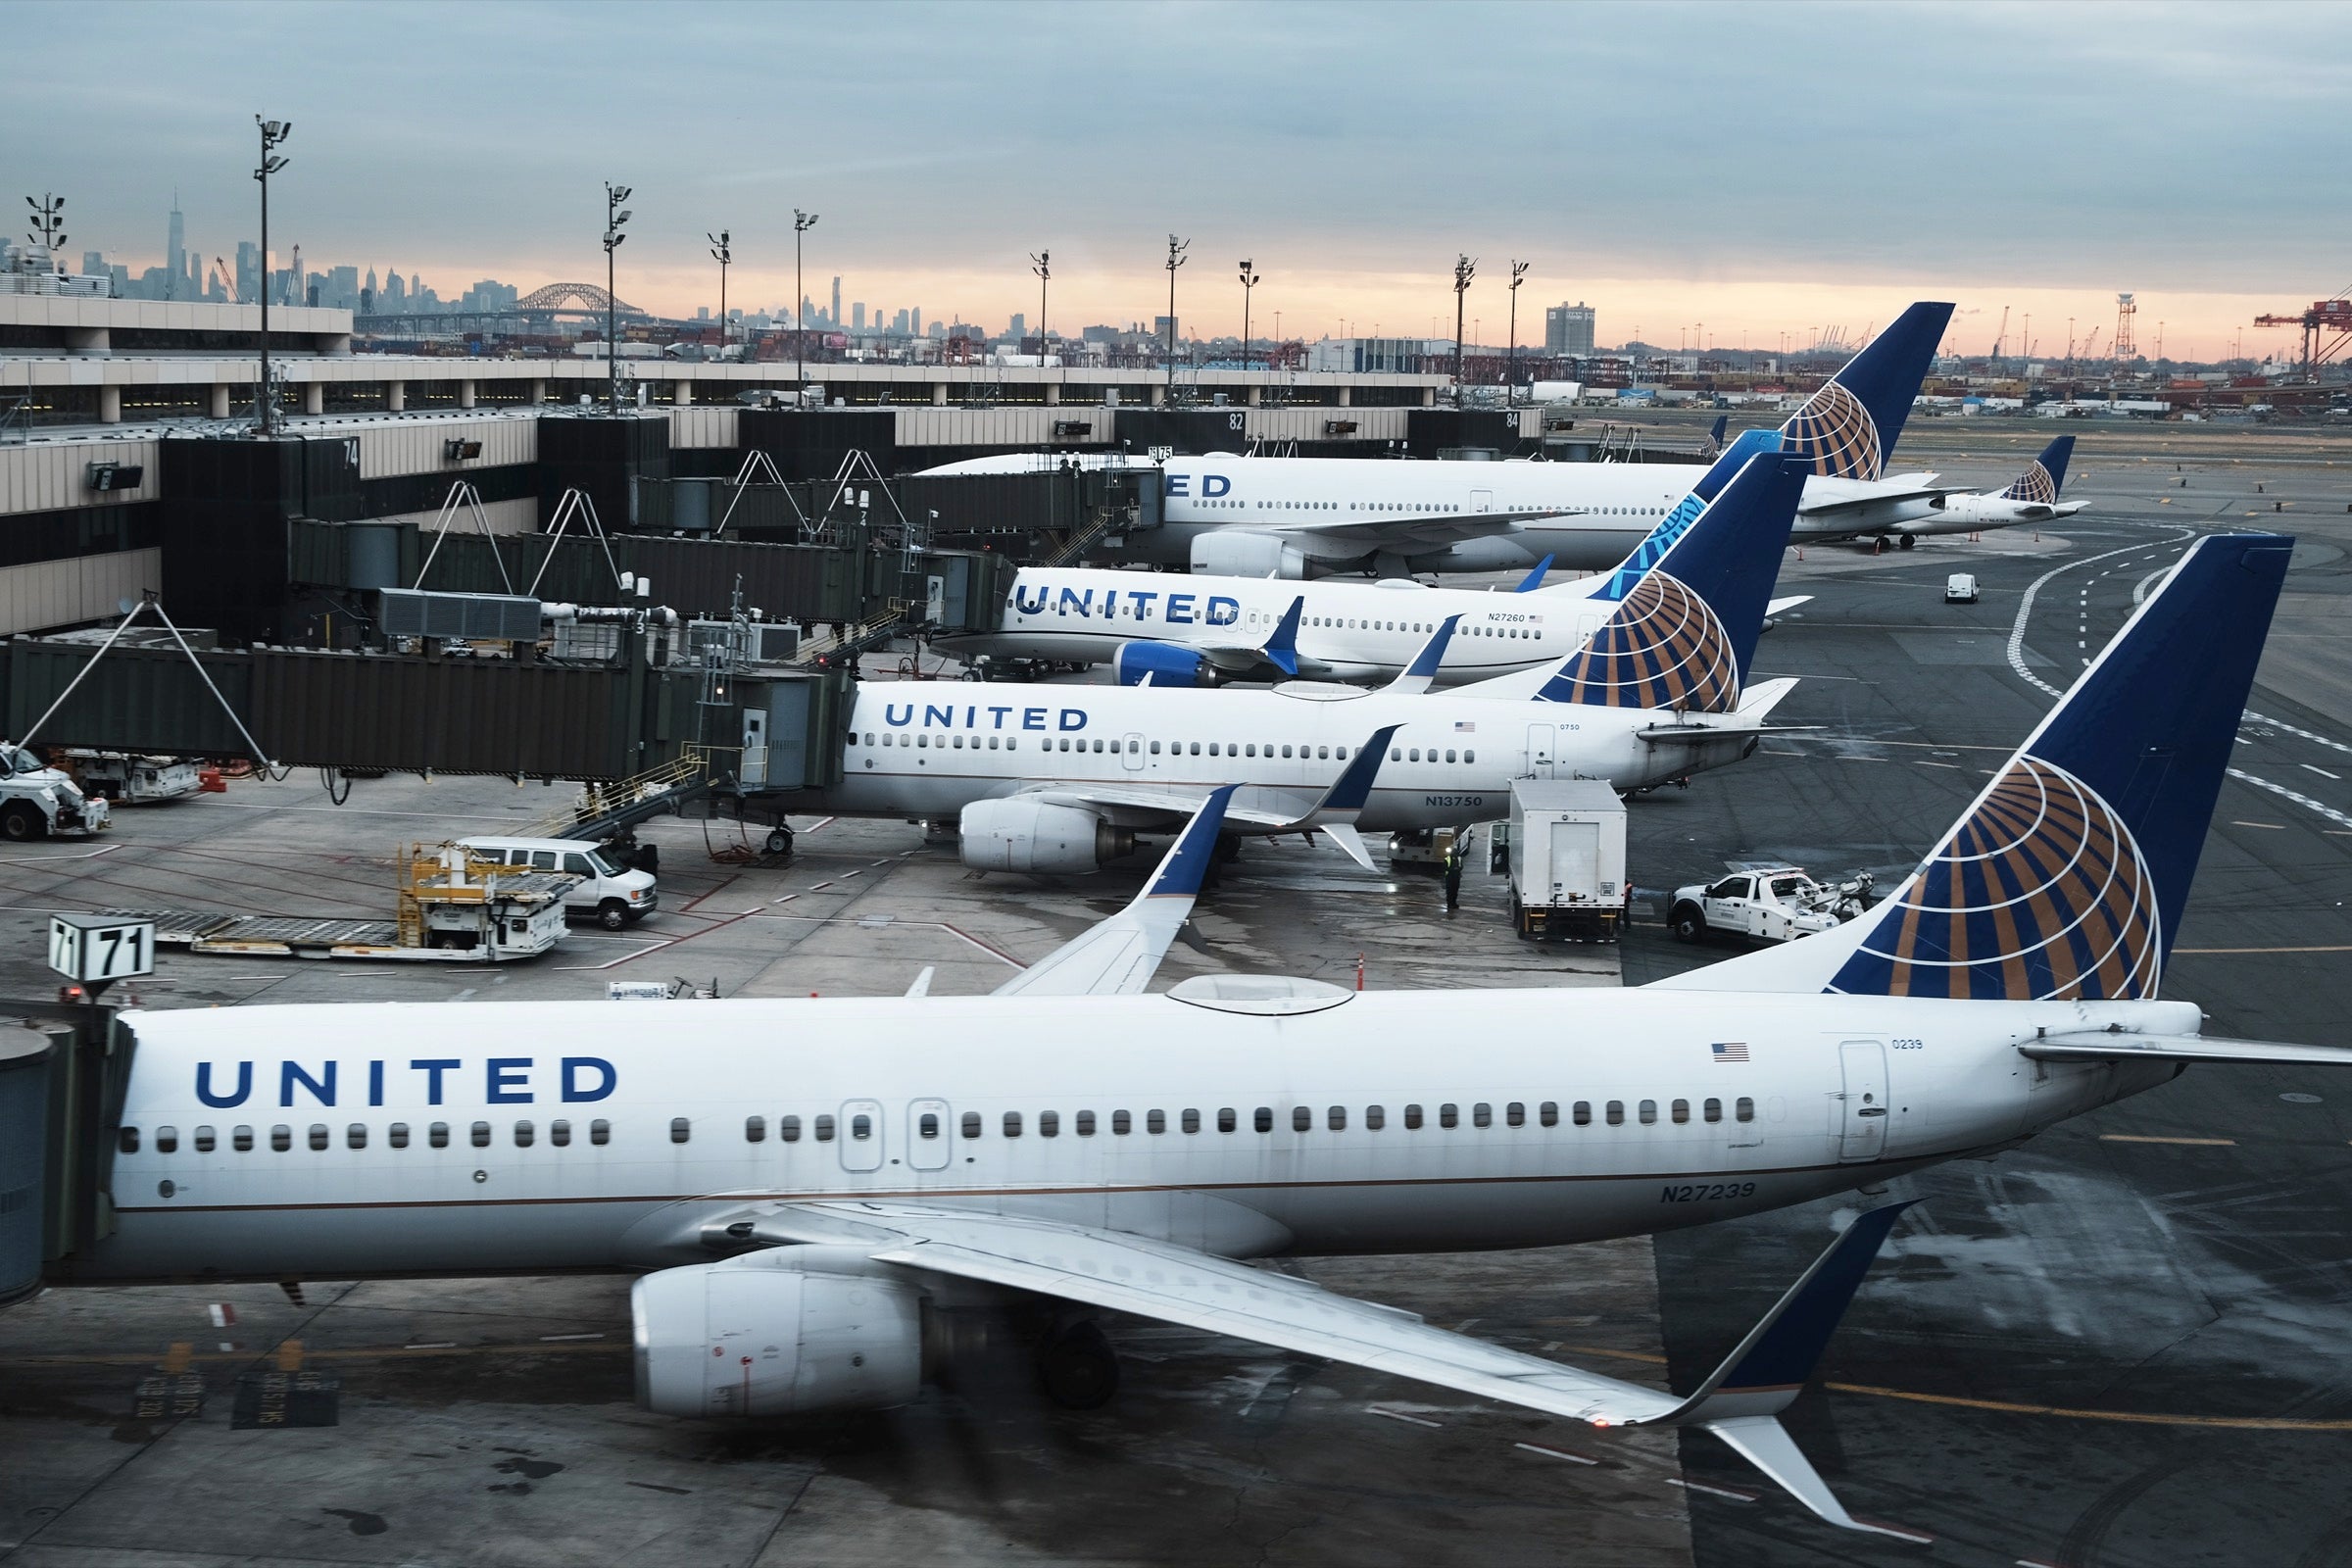 United credit card holders: Earn bonus miles with the Mile Badge Game promotion